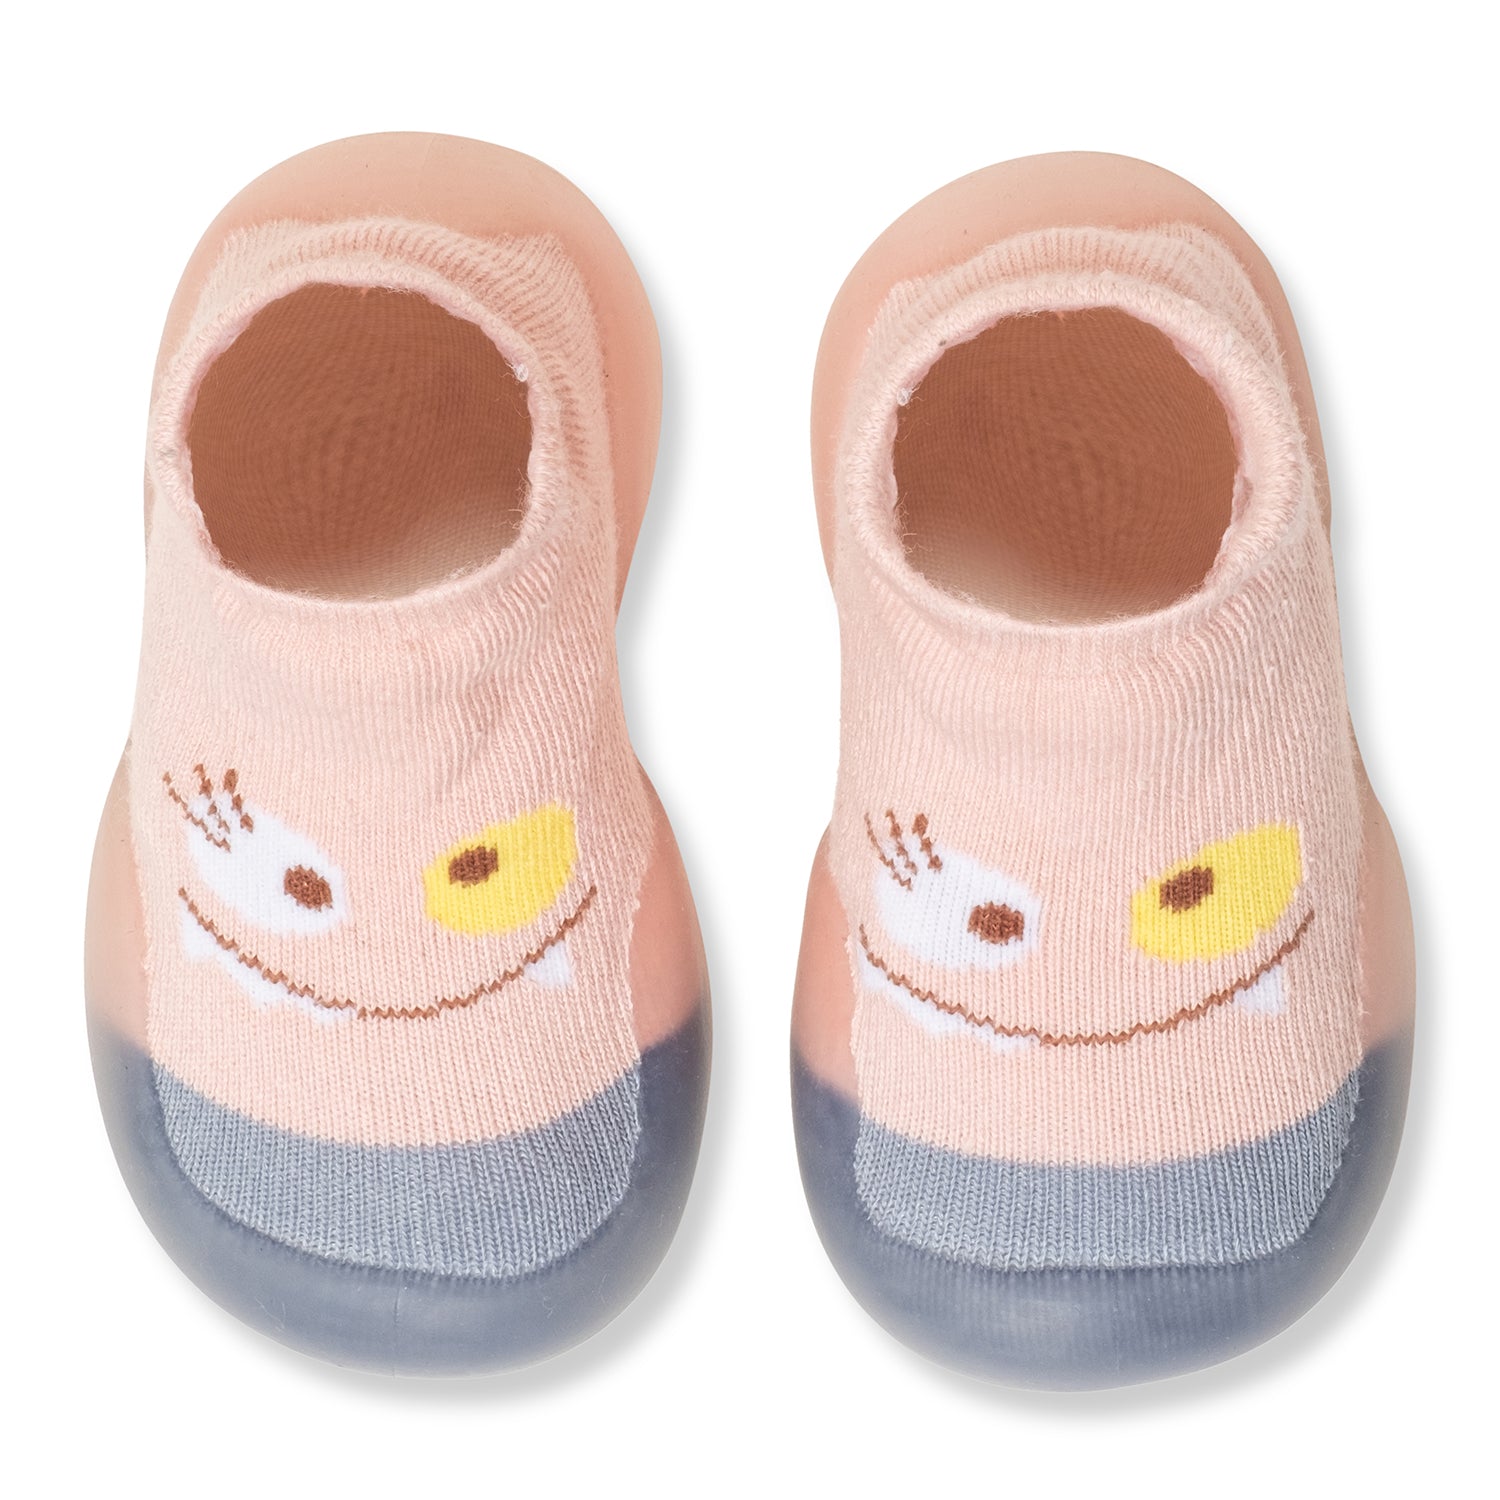 Baby Moo Cute Eye Anti-Skid Rubber Sole Comfy Slip-On Sock Shoes - Pink, Blue